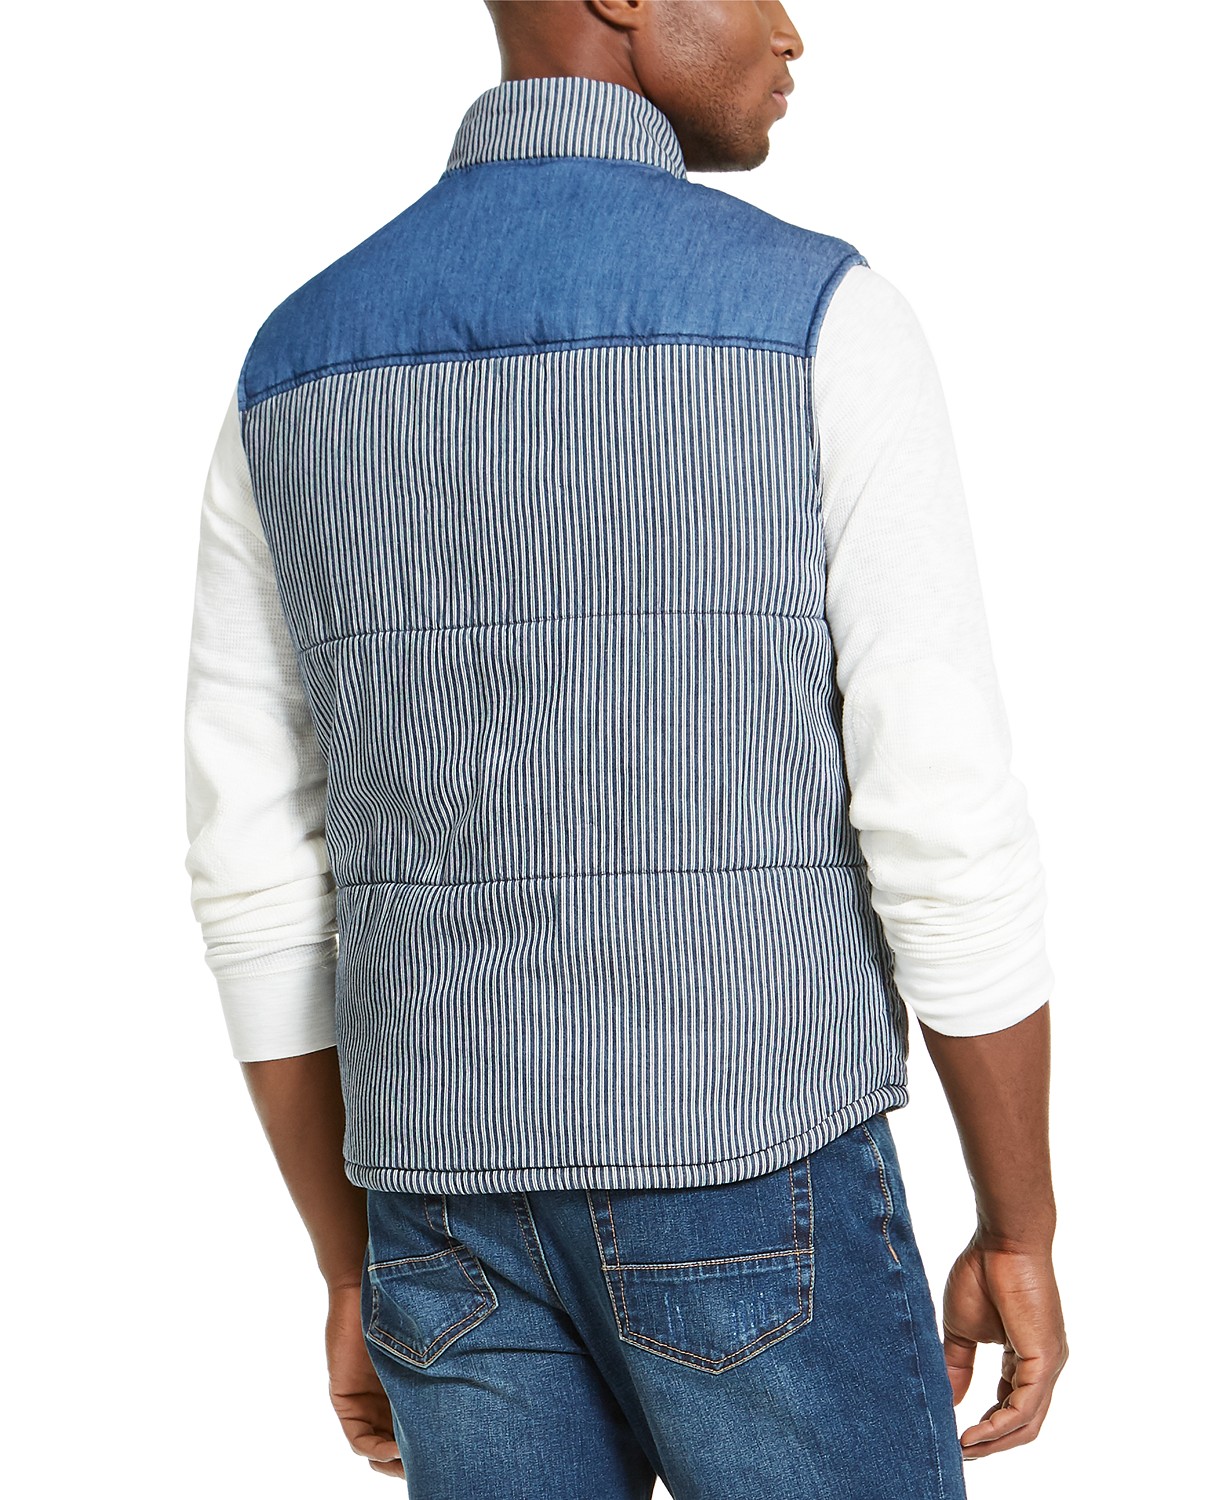 American Rag Men's Quilted Colorblocked Vest Blue Size Extra Large